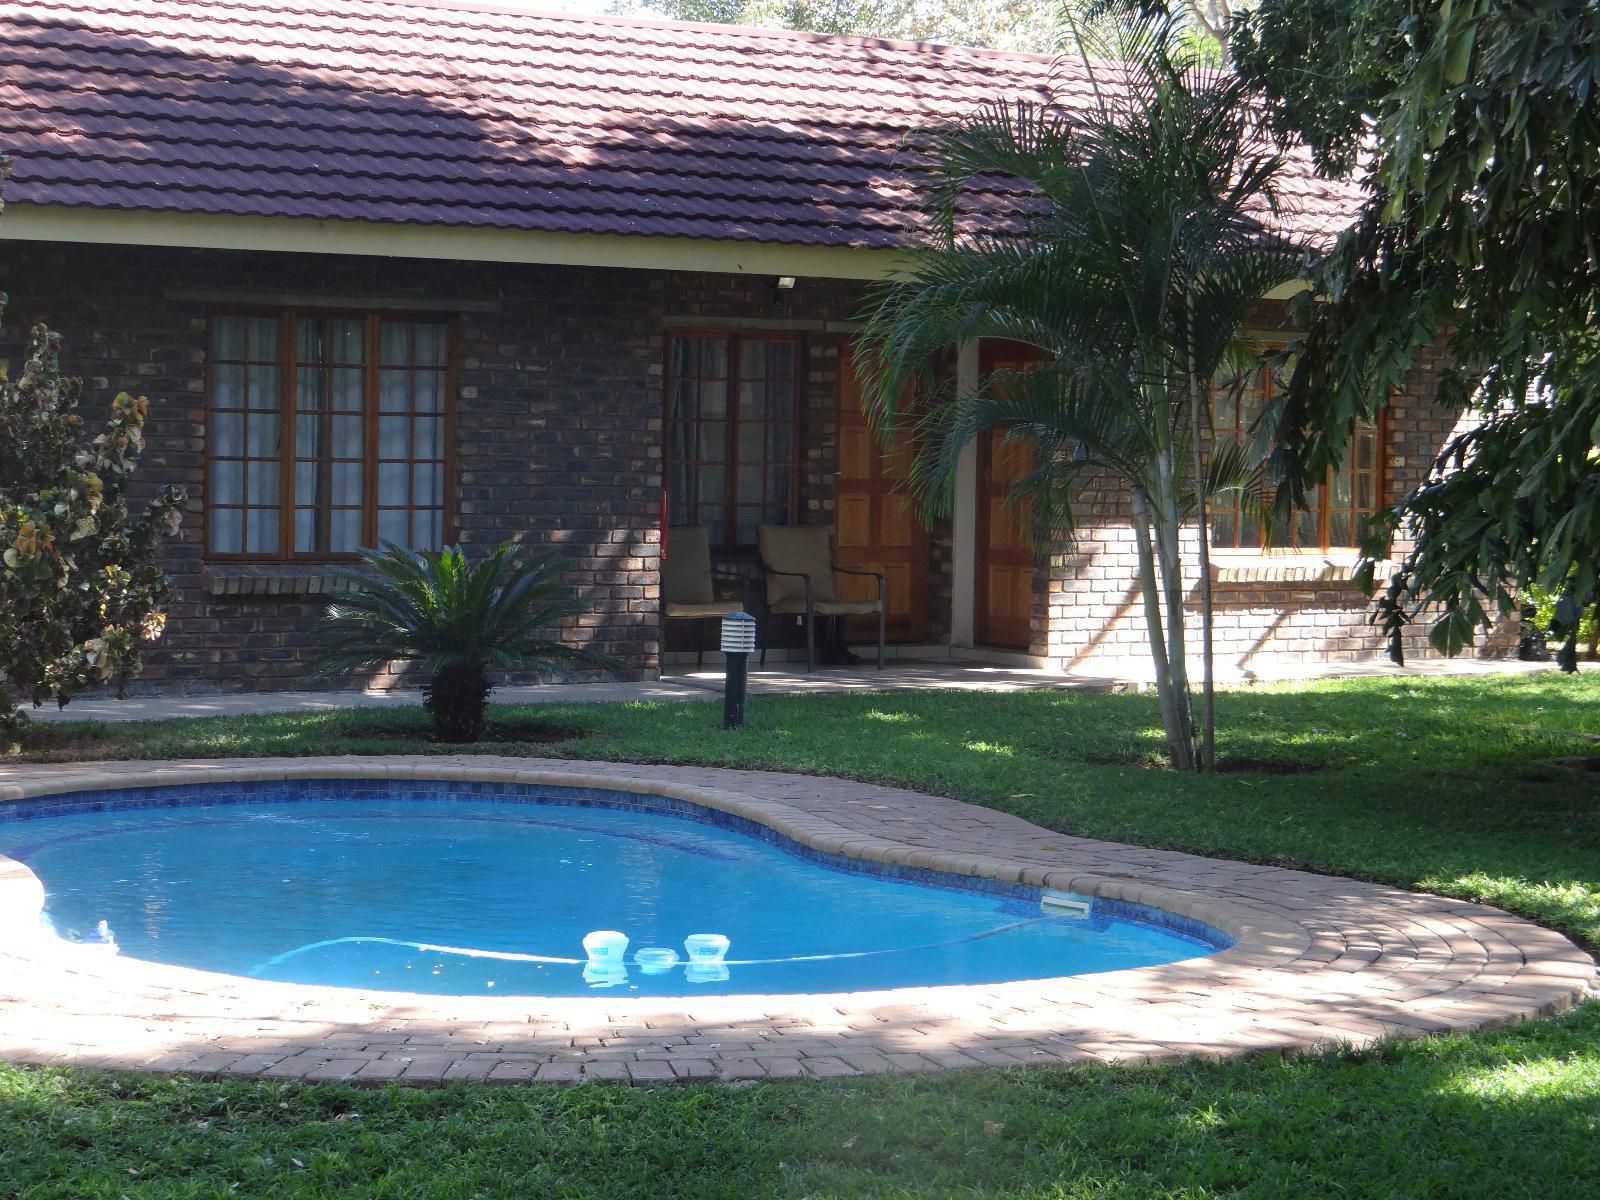 Lepha Guest House Lephalale Ellisras Limpopo Province South Africa House, Building, Architecture, Palm Tree, Plant, Nature, Wood, Swimming Pool